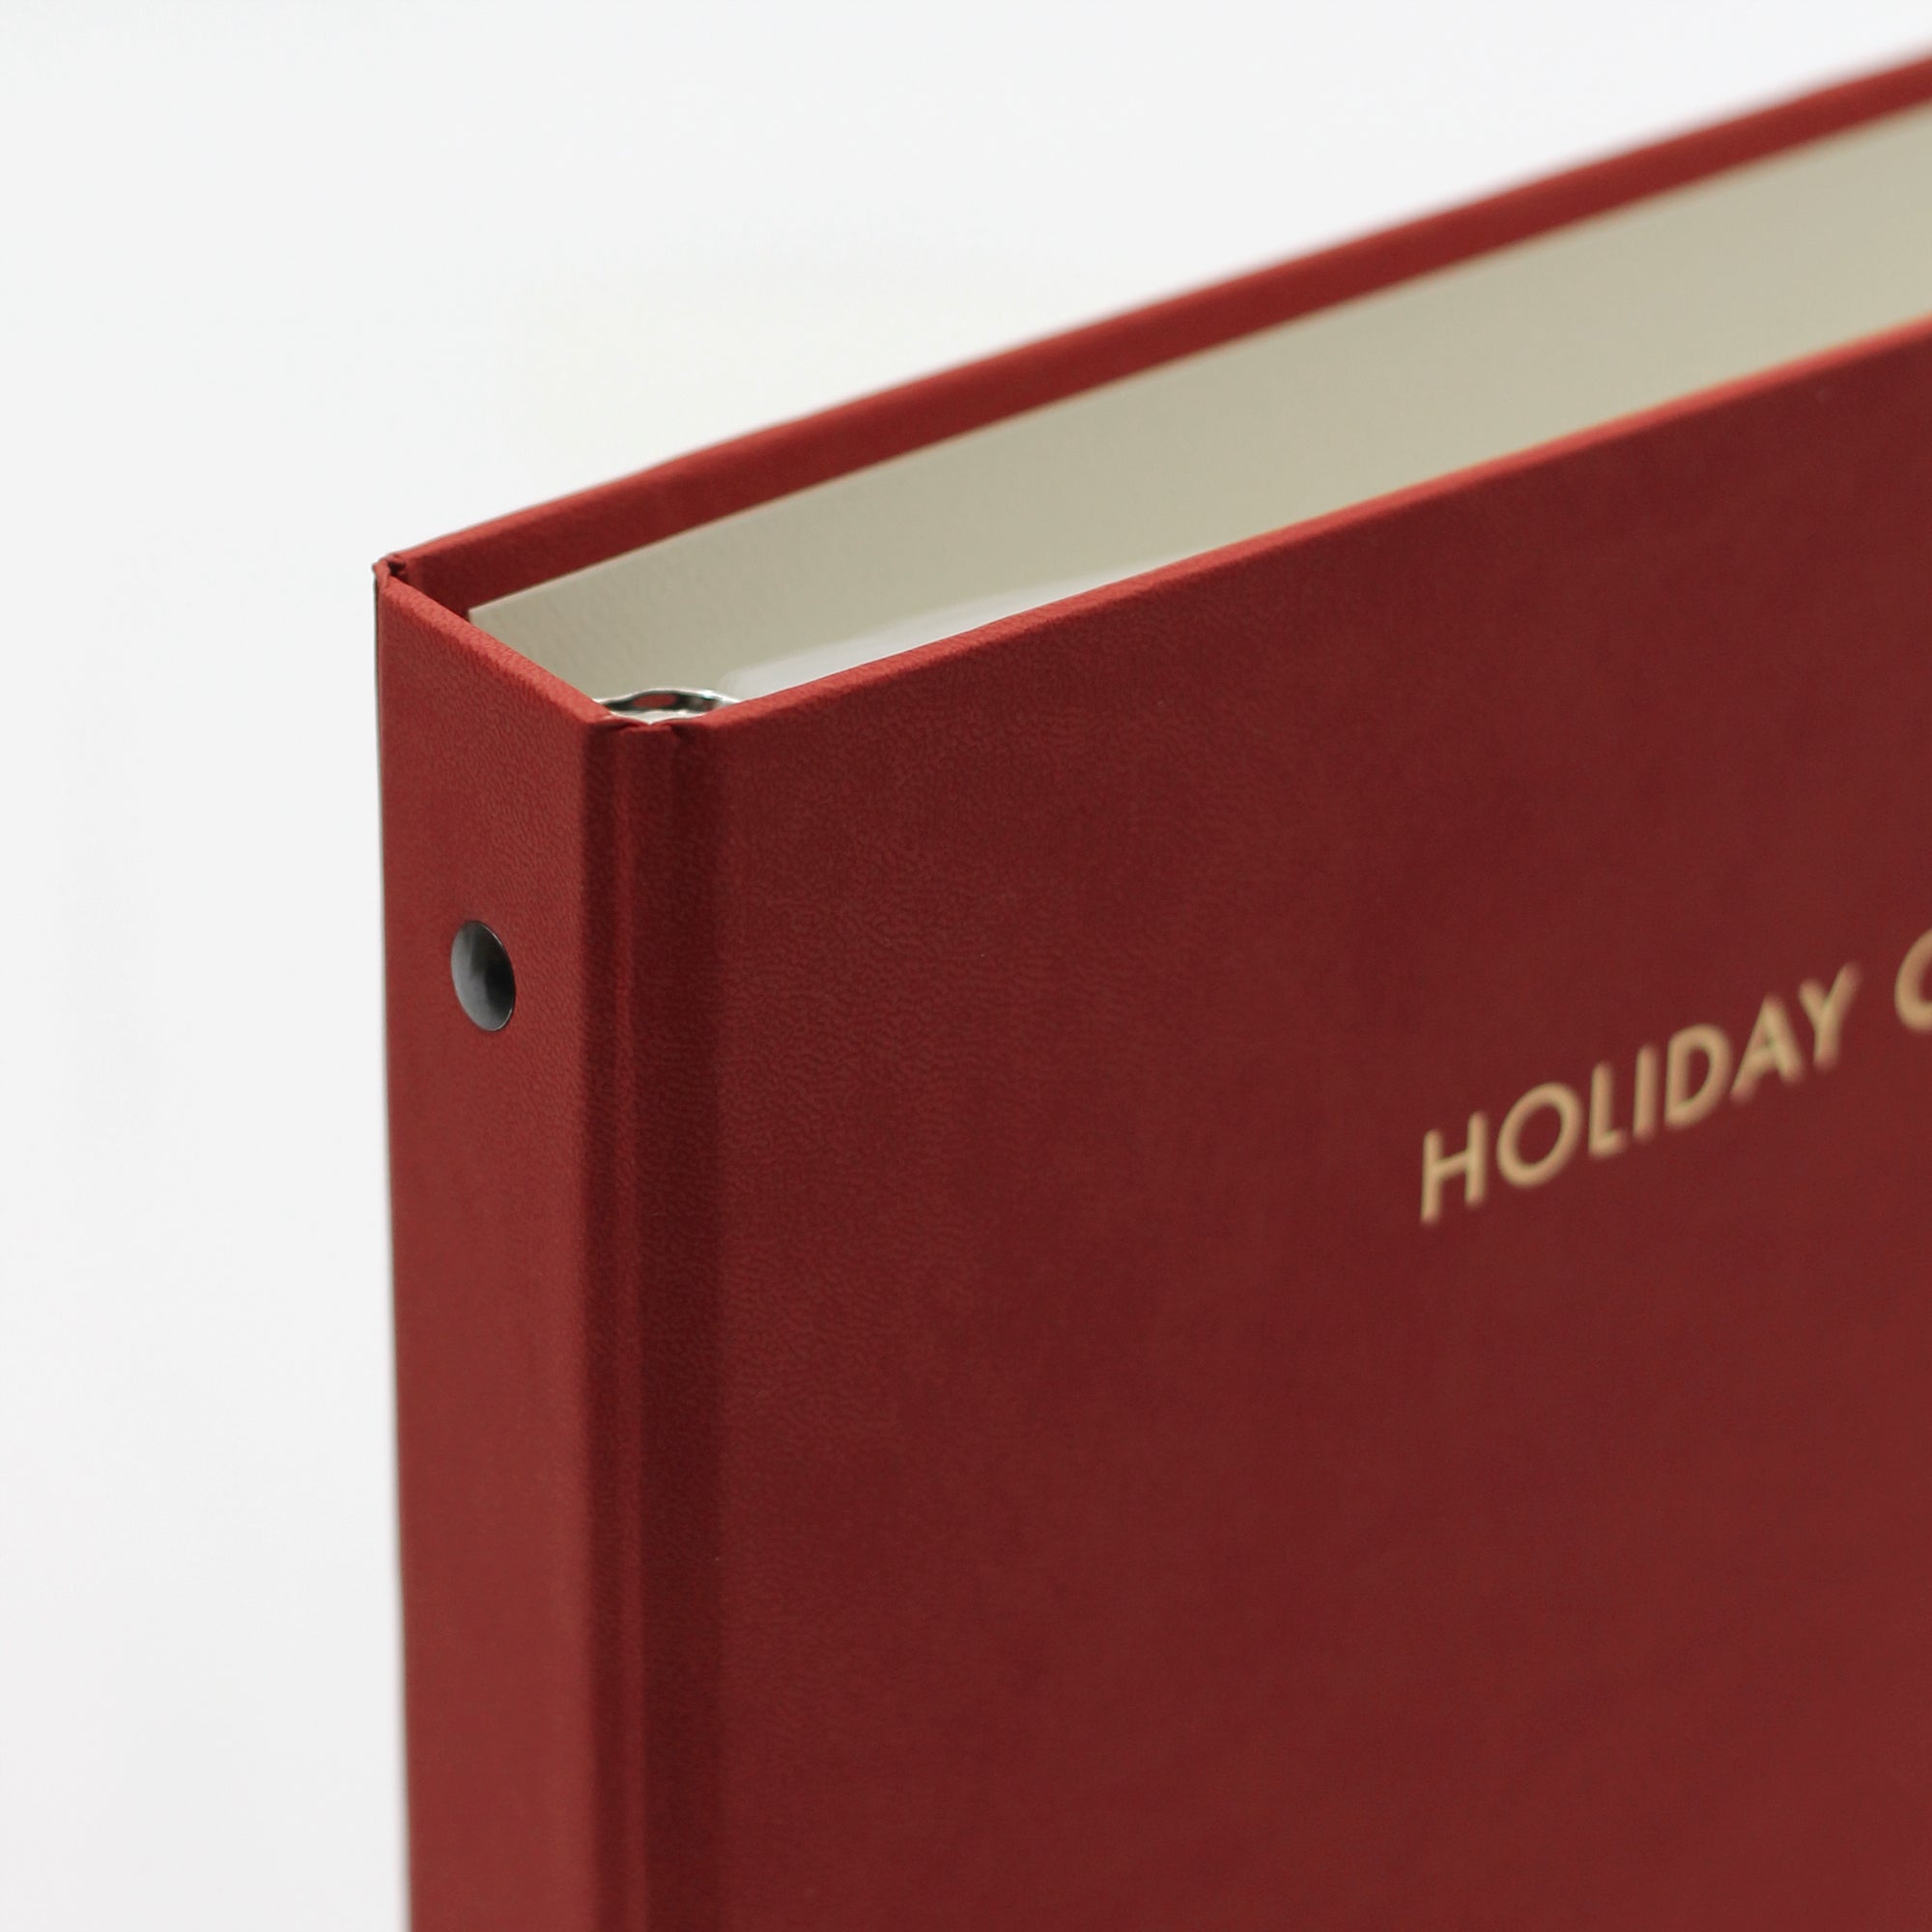 Christmas Card Album | Cover: Moss Vegan Leather | Available Personalized